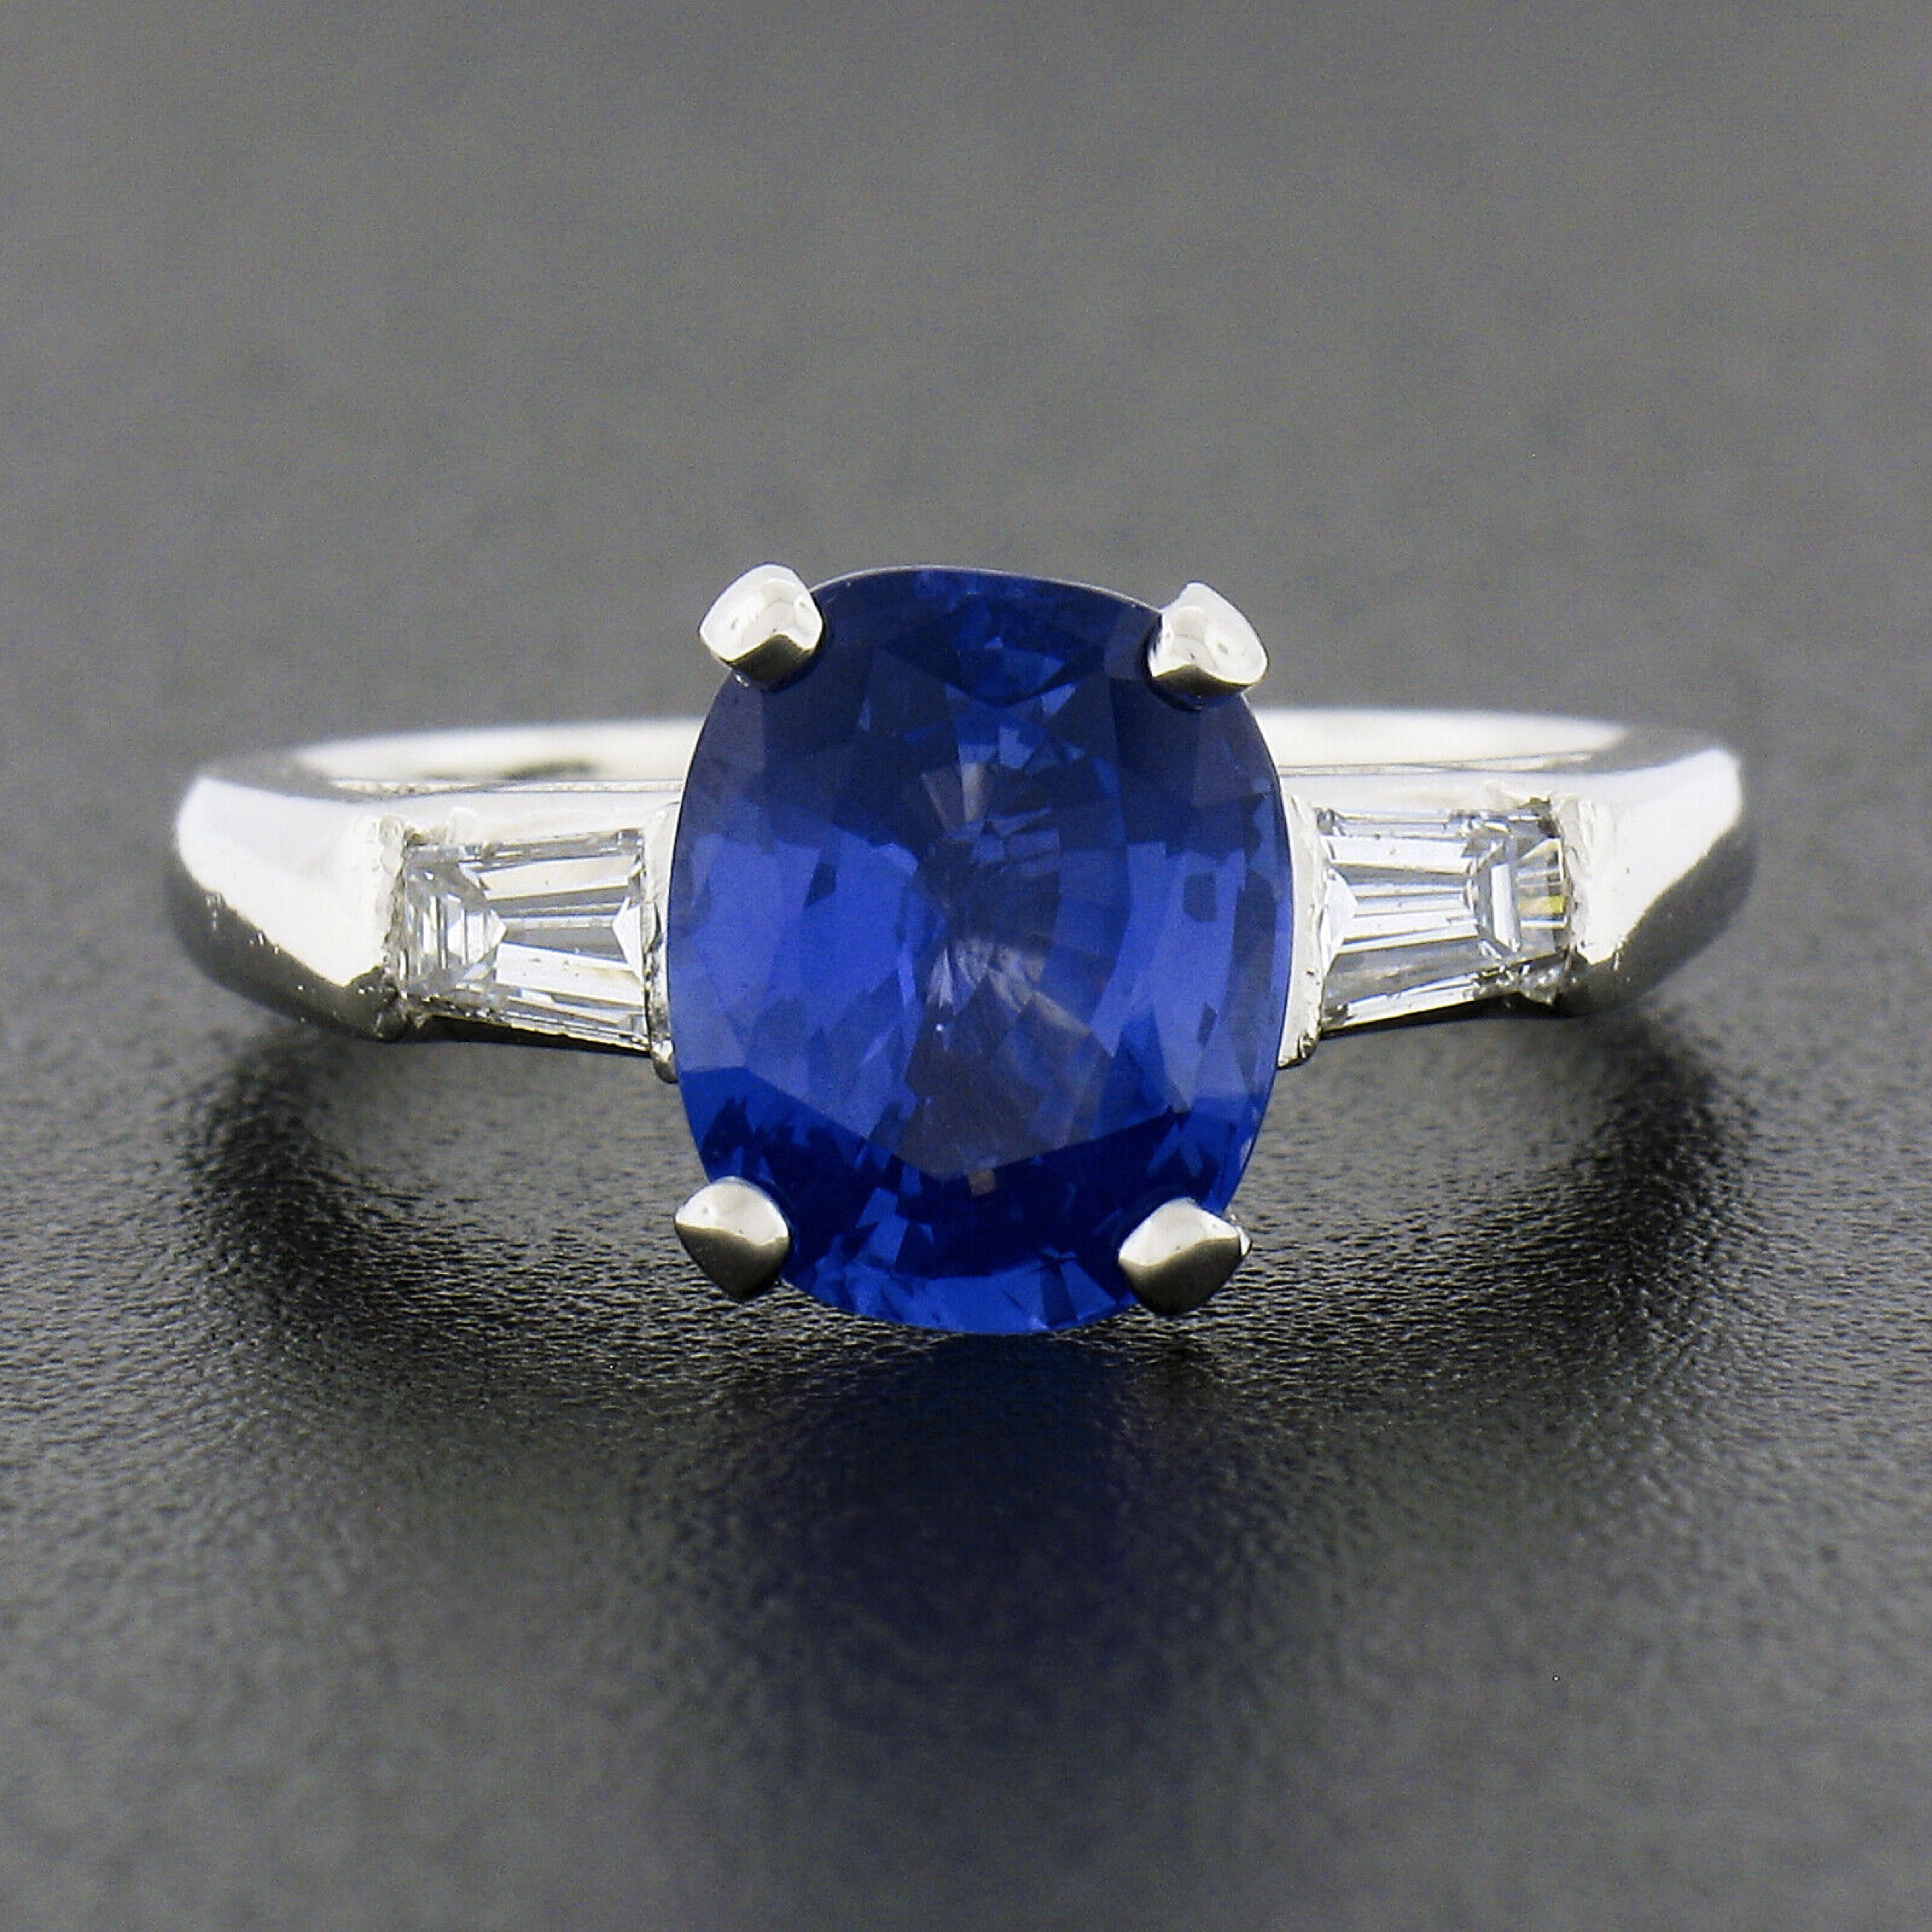 You are looking at a truly breathtaking sapphire and diamond engagement ring that is crafted in solid platinum. This vintage ring features a gorgeous, GIA certified, cushion cut sapphire solitaire neatly prong set in the center basket and flanked on